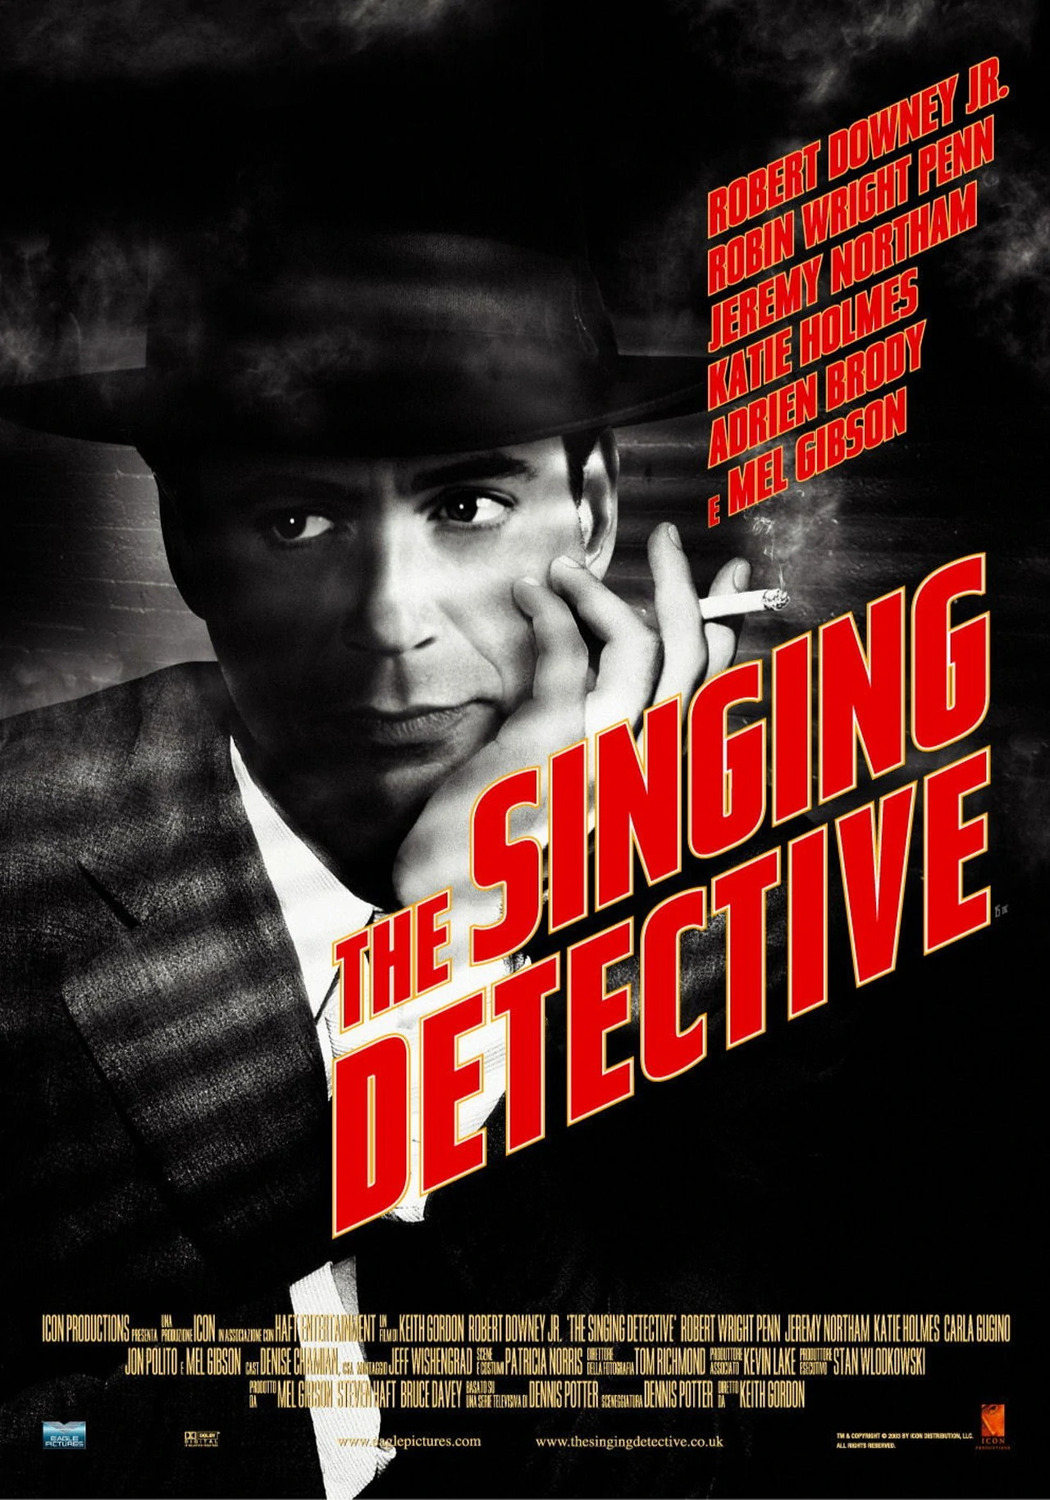 Extra Large Movie Poster Image for The Singing Detective (#2 of 2)